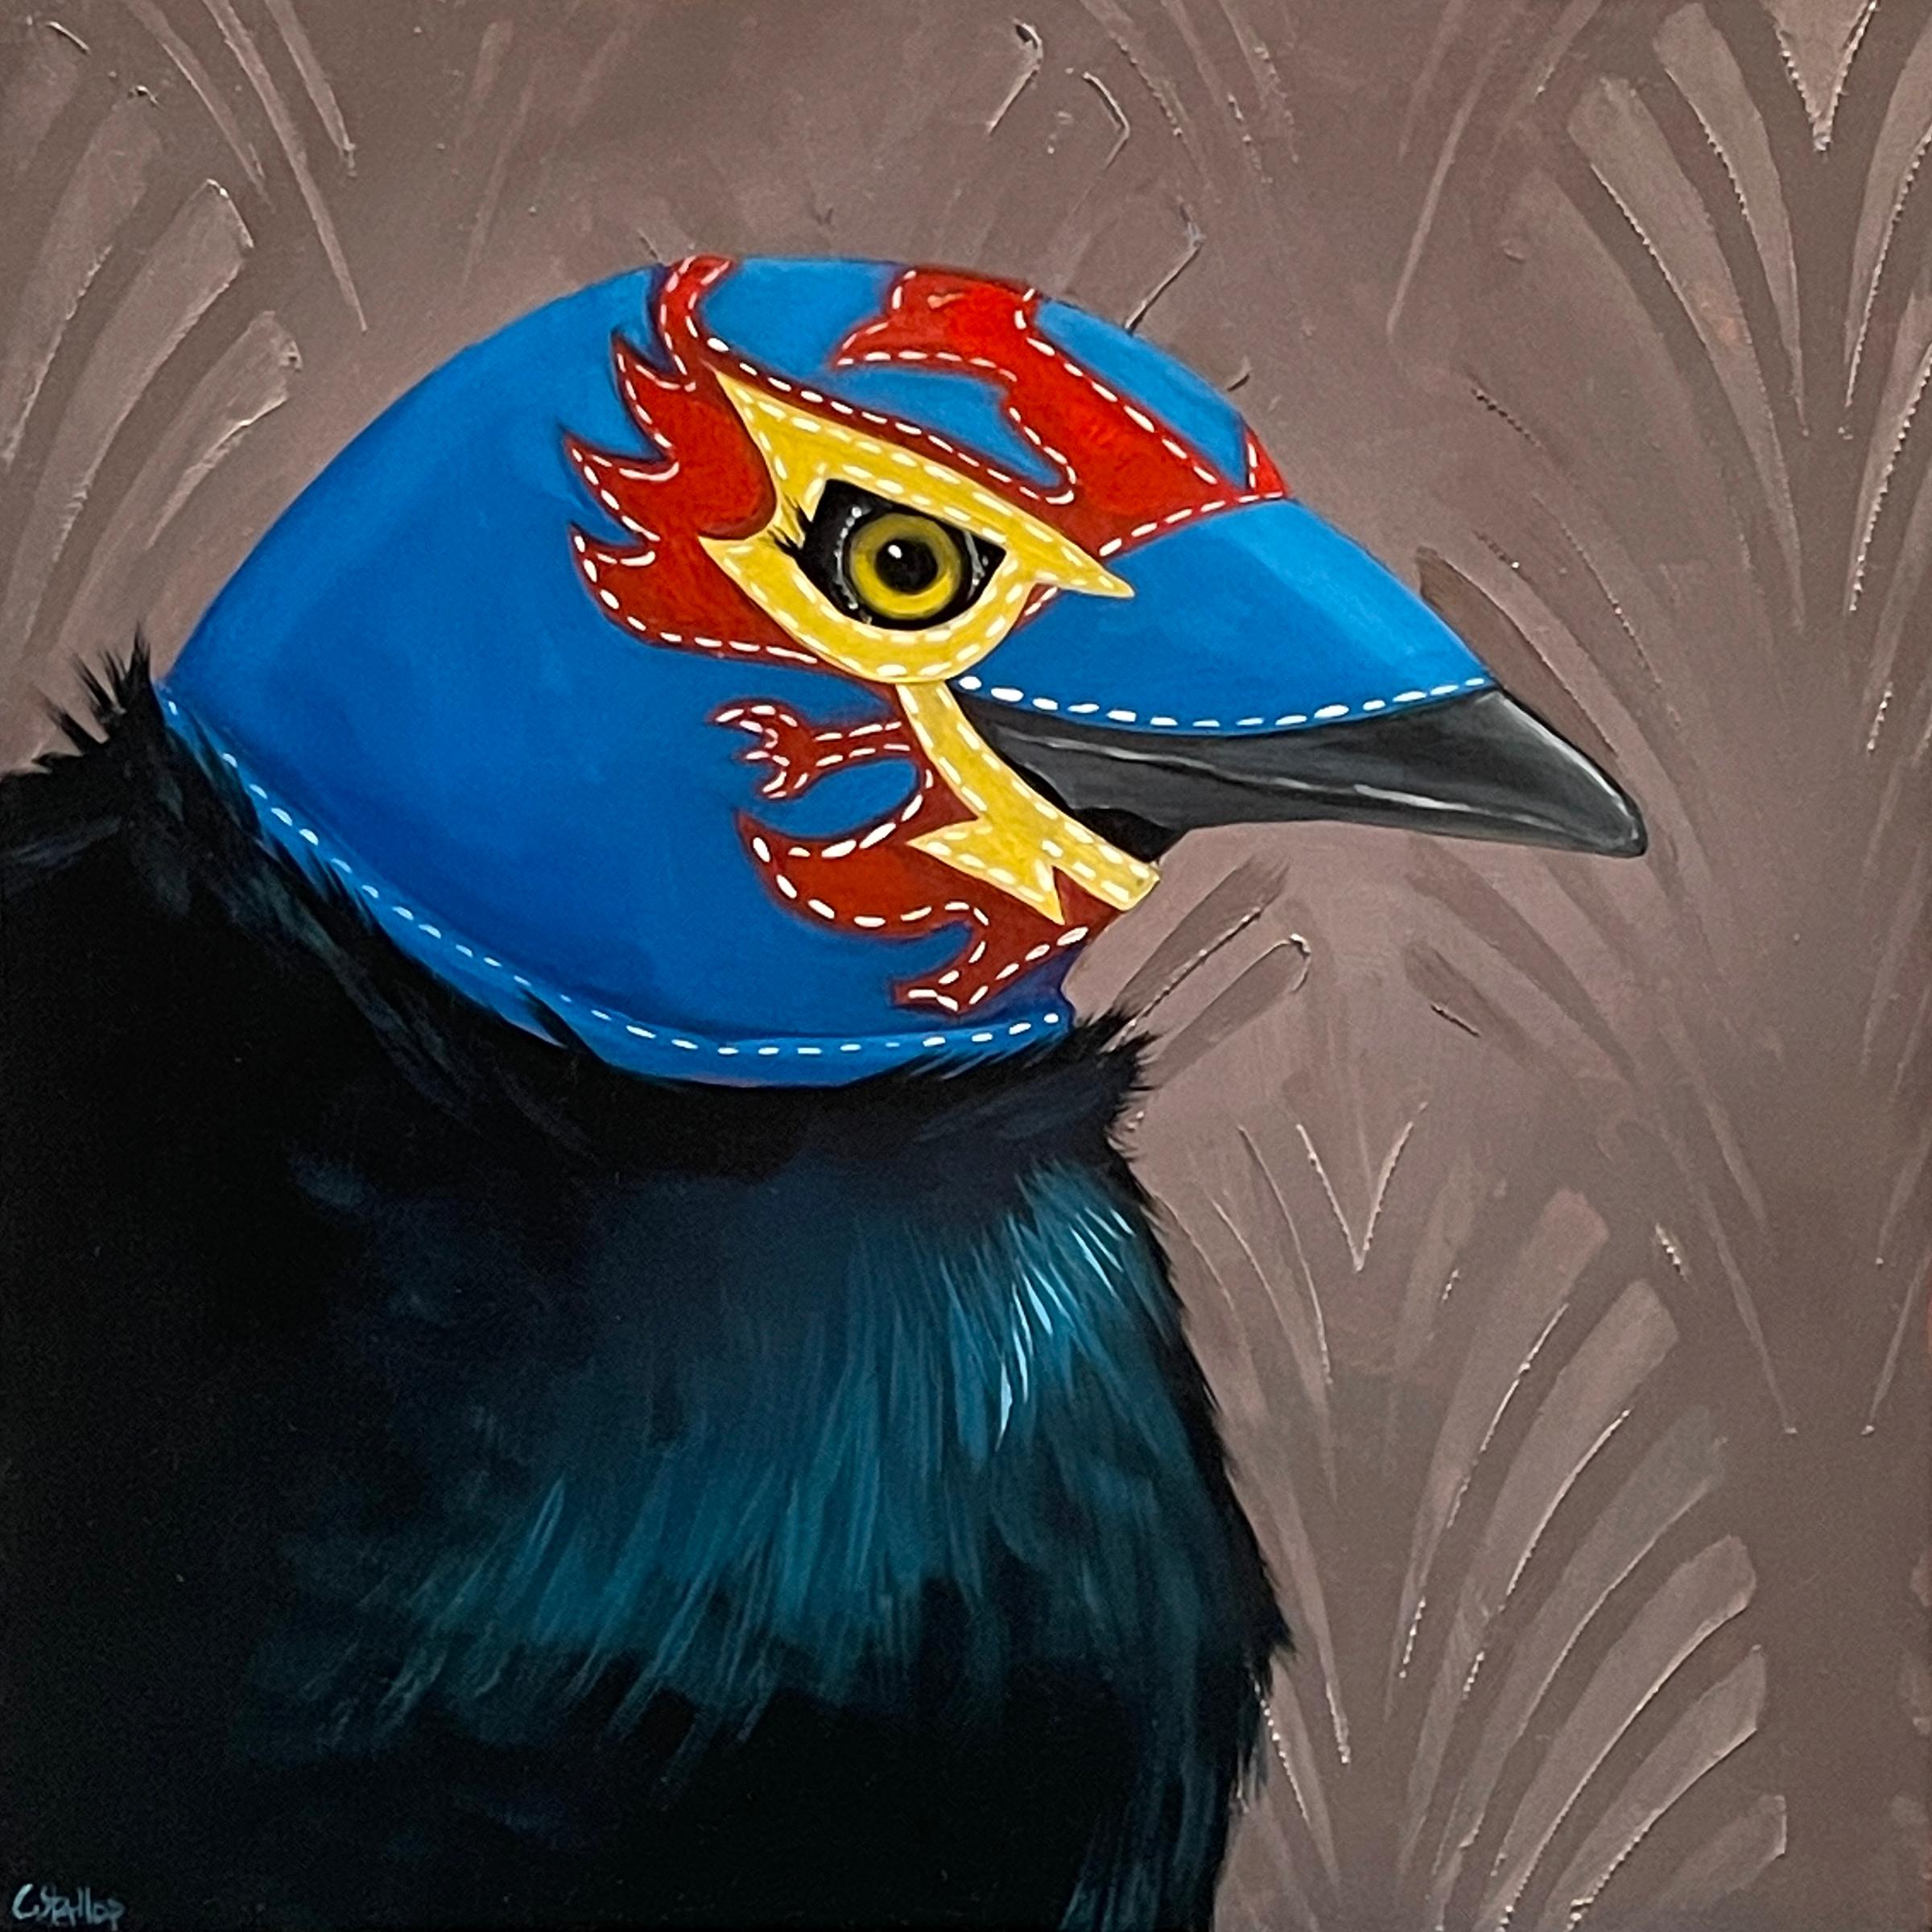 Christy Stallop Interior Painting - "Dos Caras" Oil Painting